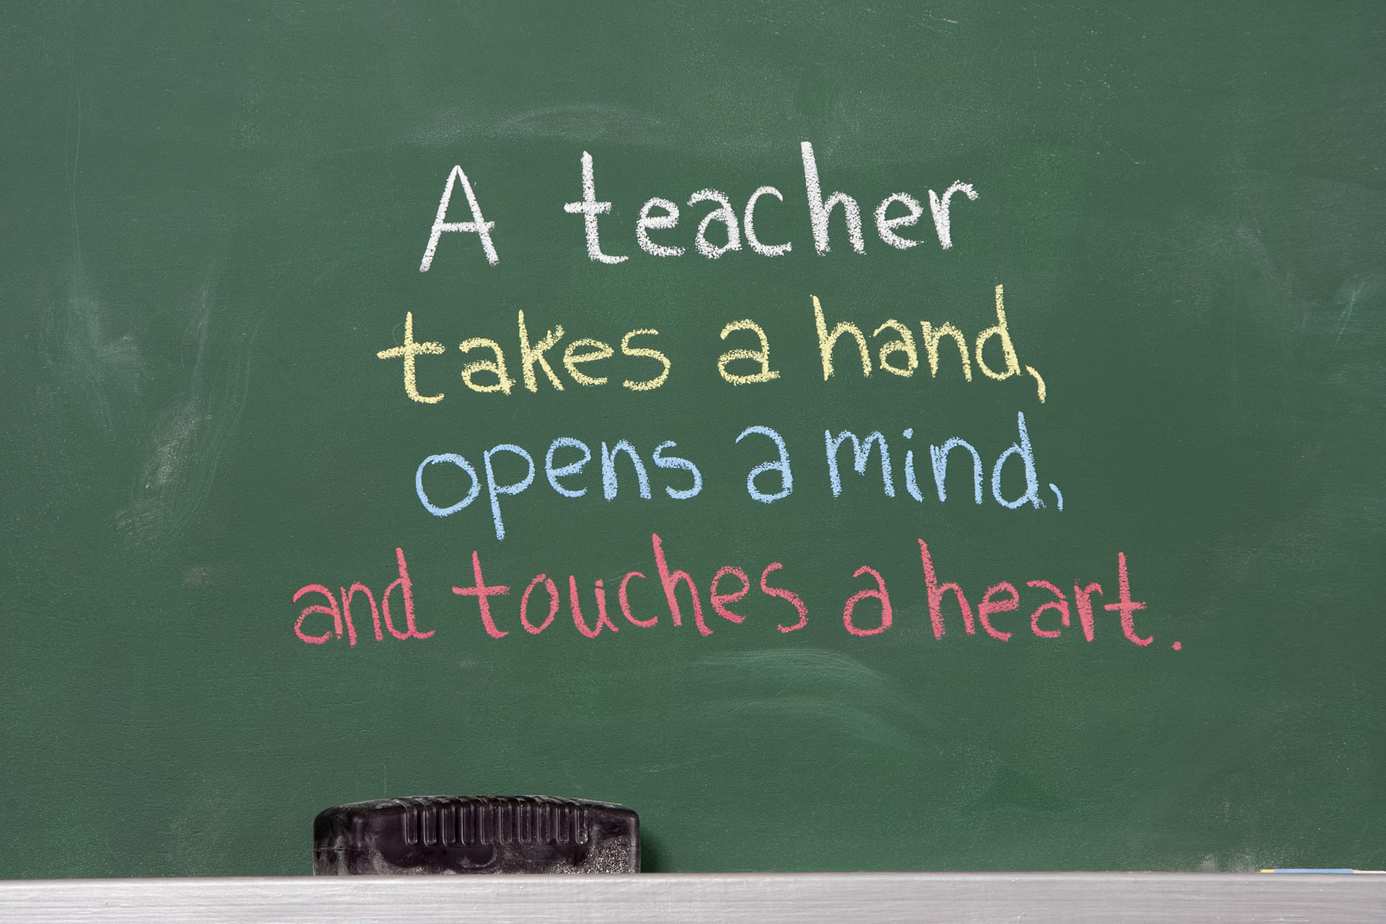 World Teachers' Day. A reminder of life, situations and people who helped us to grow as individuals and citizens.